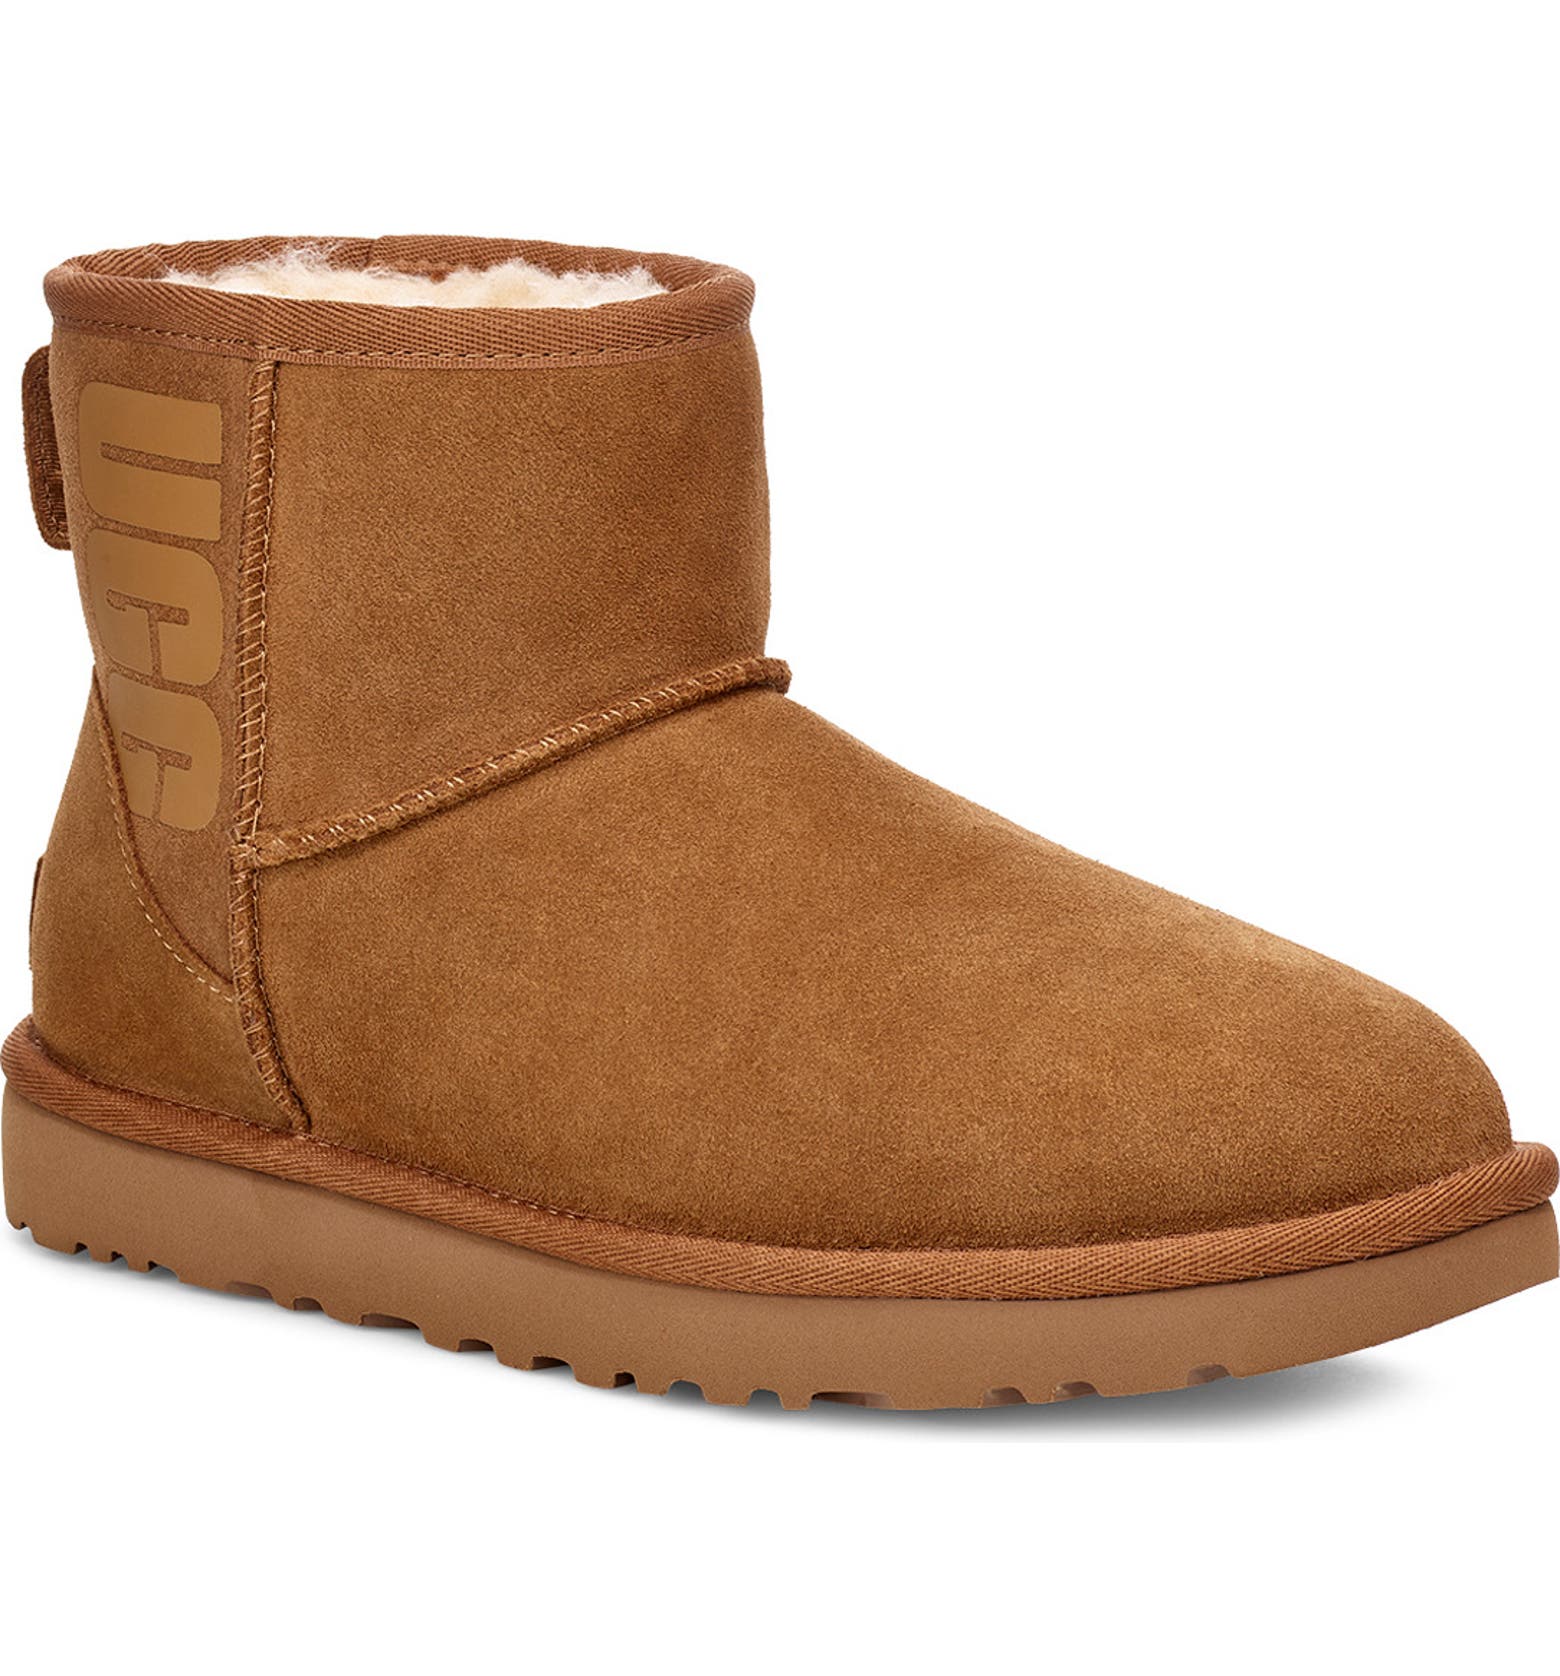 nordstrom return policy on uggs